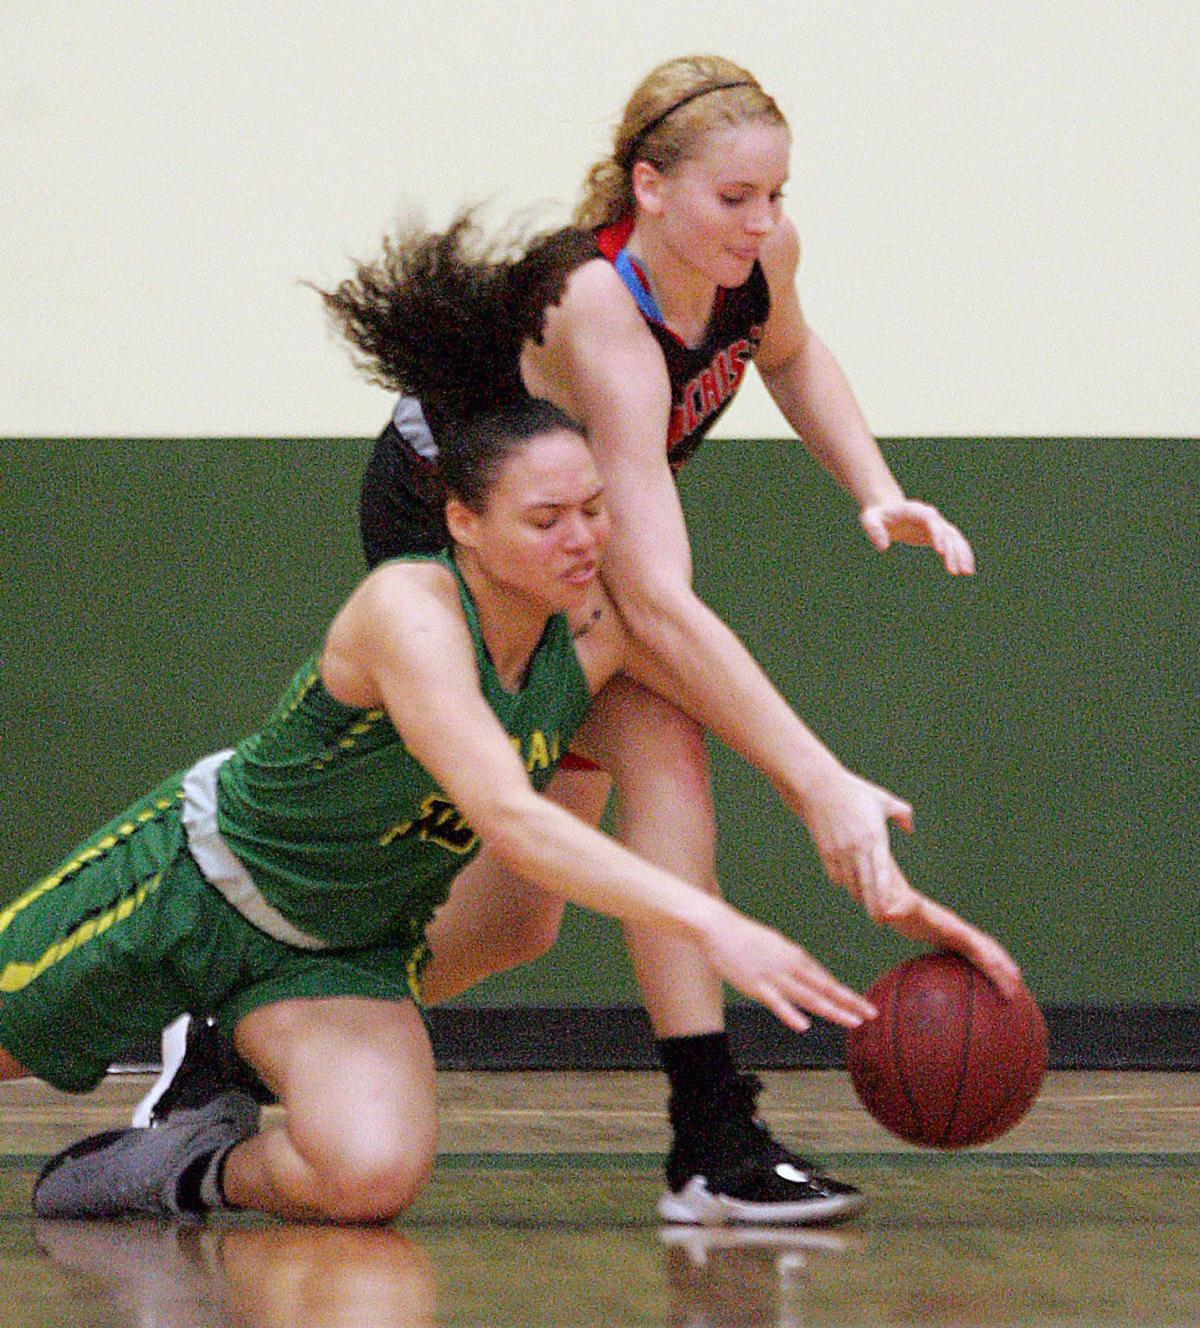 Mikayla Pippin hustles, battles for loose ball in Wednesday loss to Cochise.